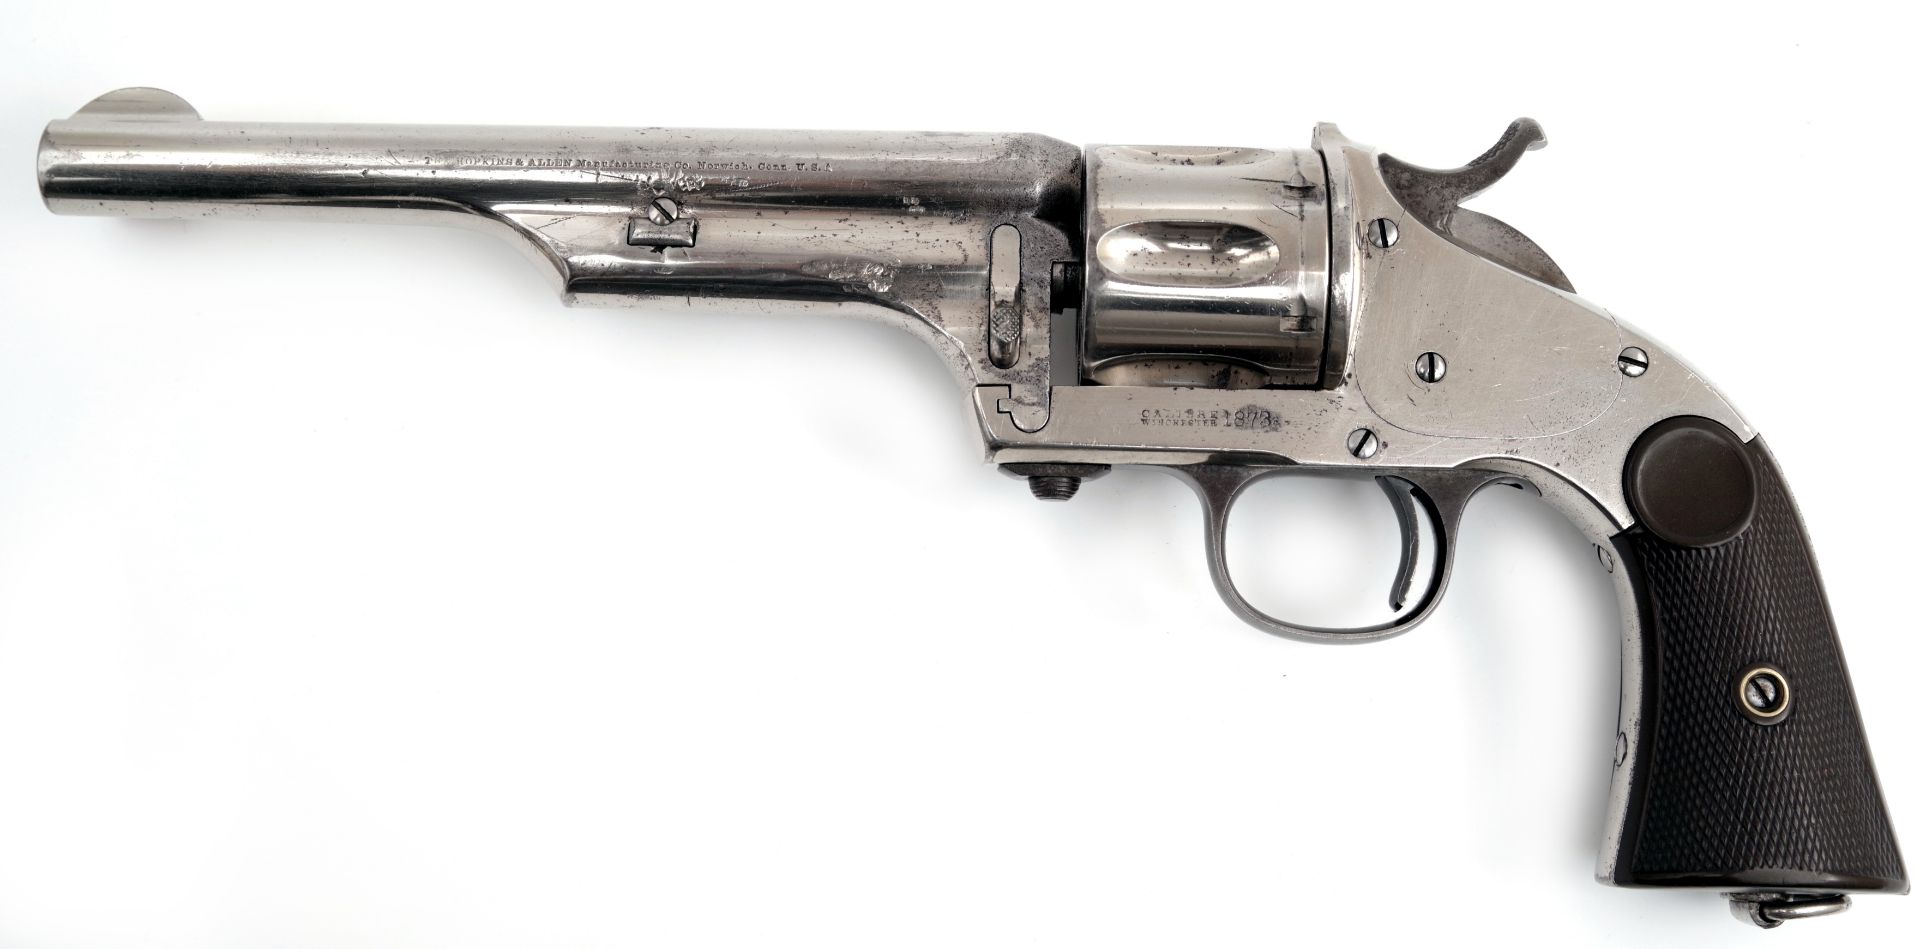 Merwin and Hulbert patent revolver manufactured by Hopkins and Allen - Image 5 of 5